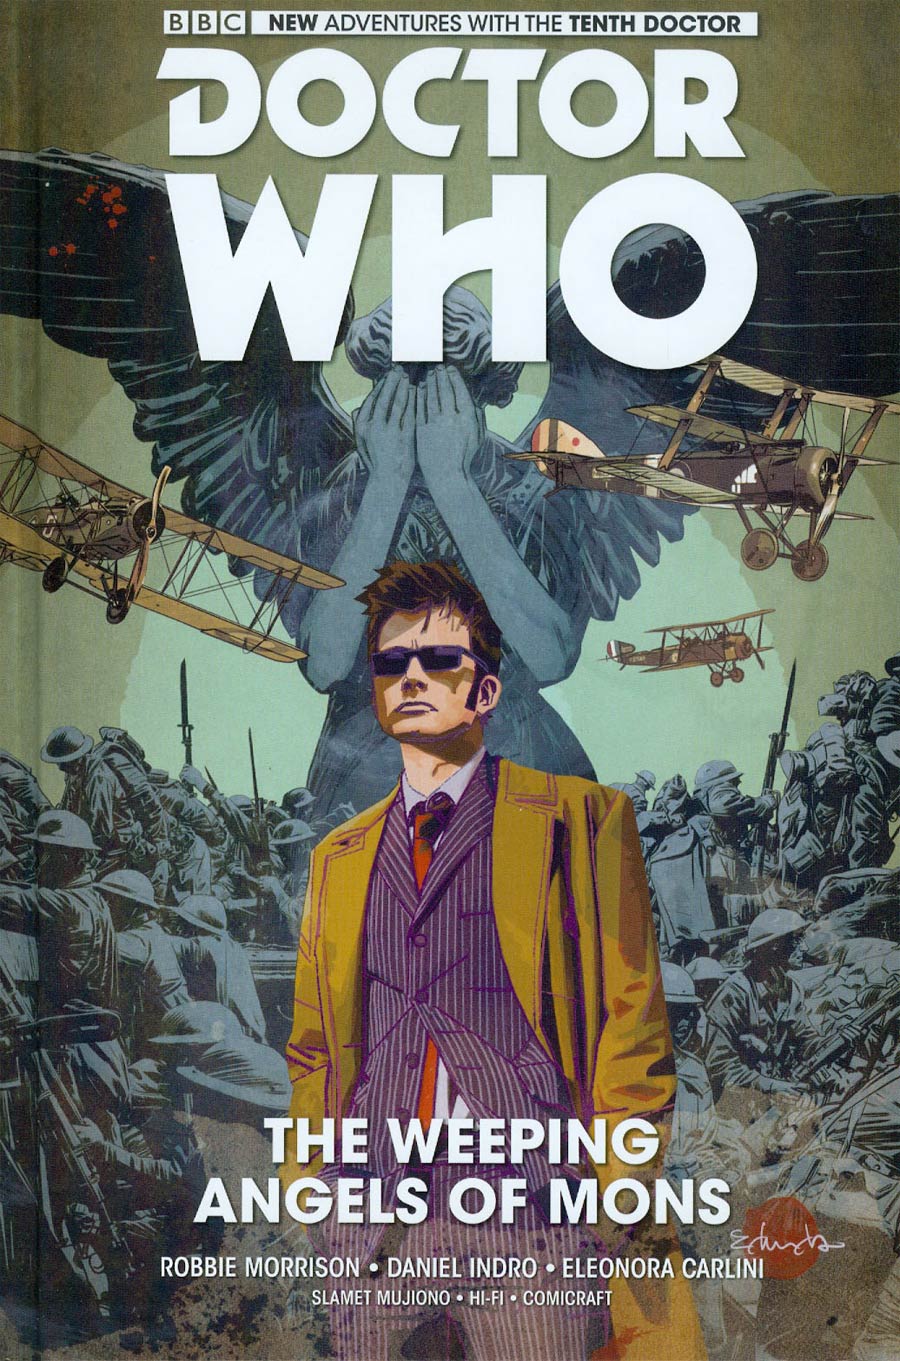 Doctor Who 10th Doctor Vol 2 Weeping Angels Of Mons HC